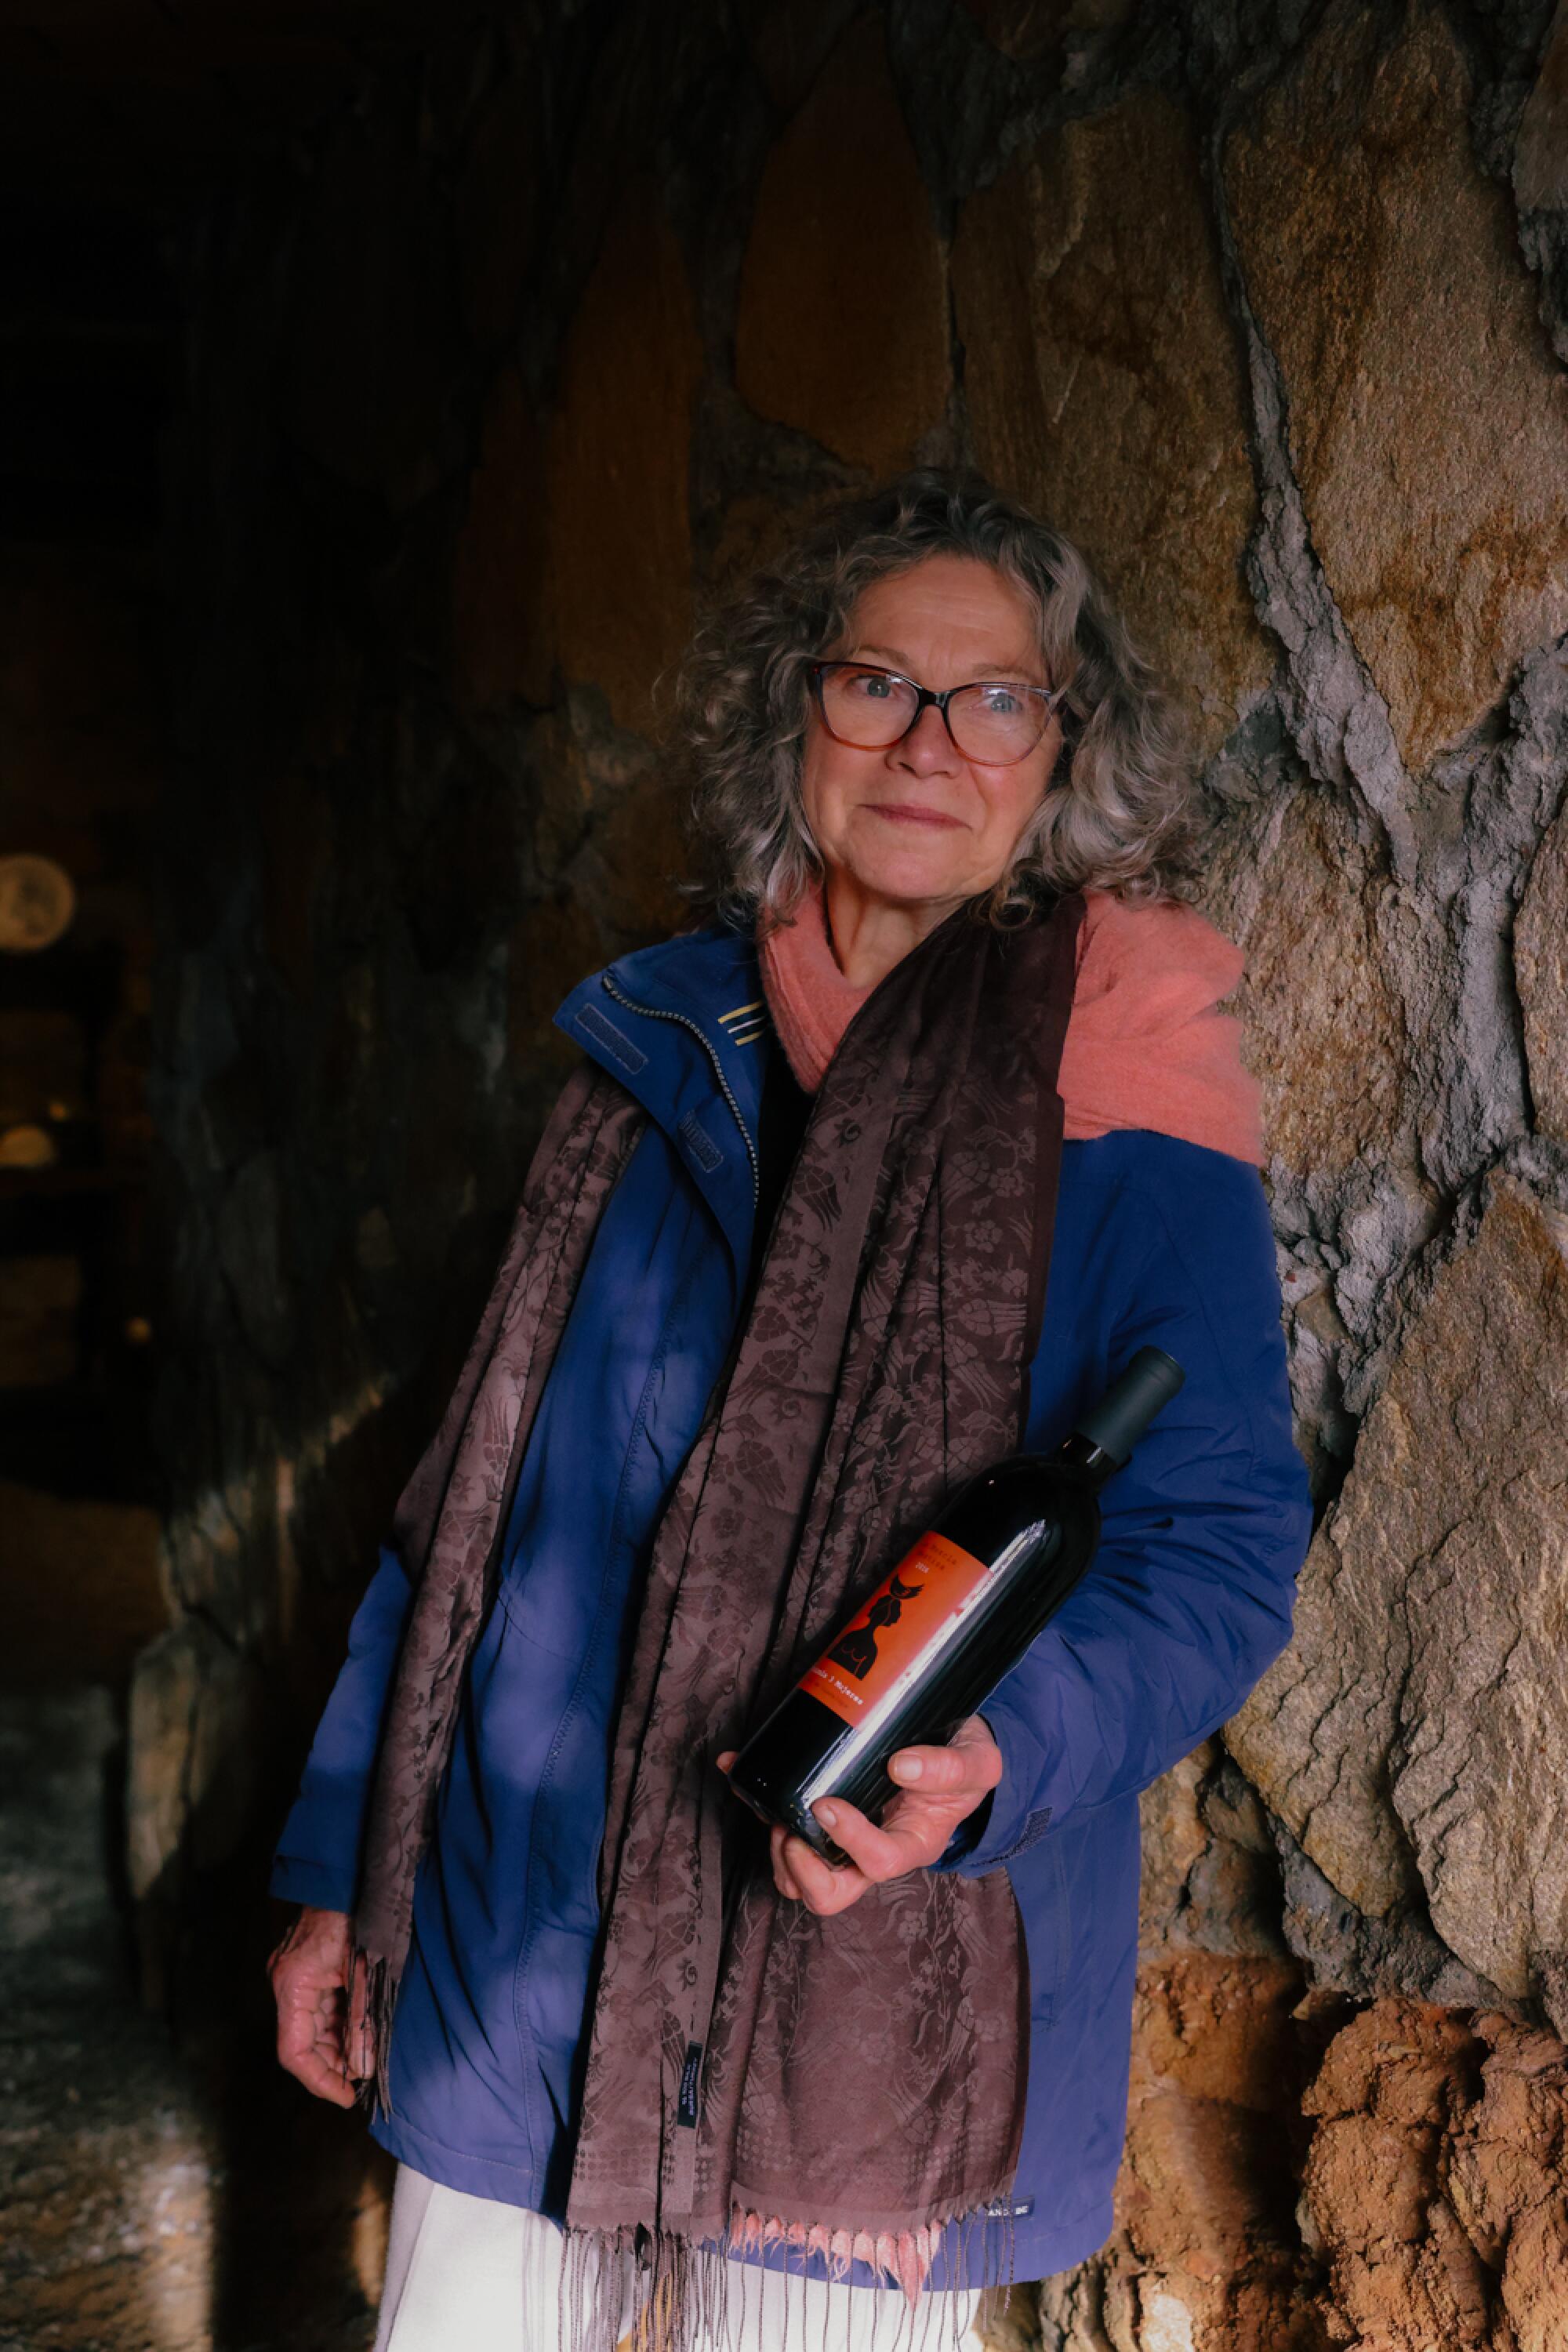 A woman leans against an uneven stone wall, holding a bottle of wine